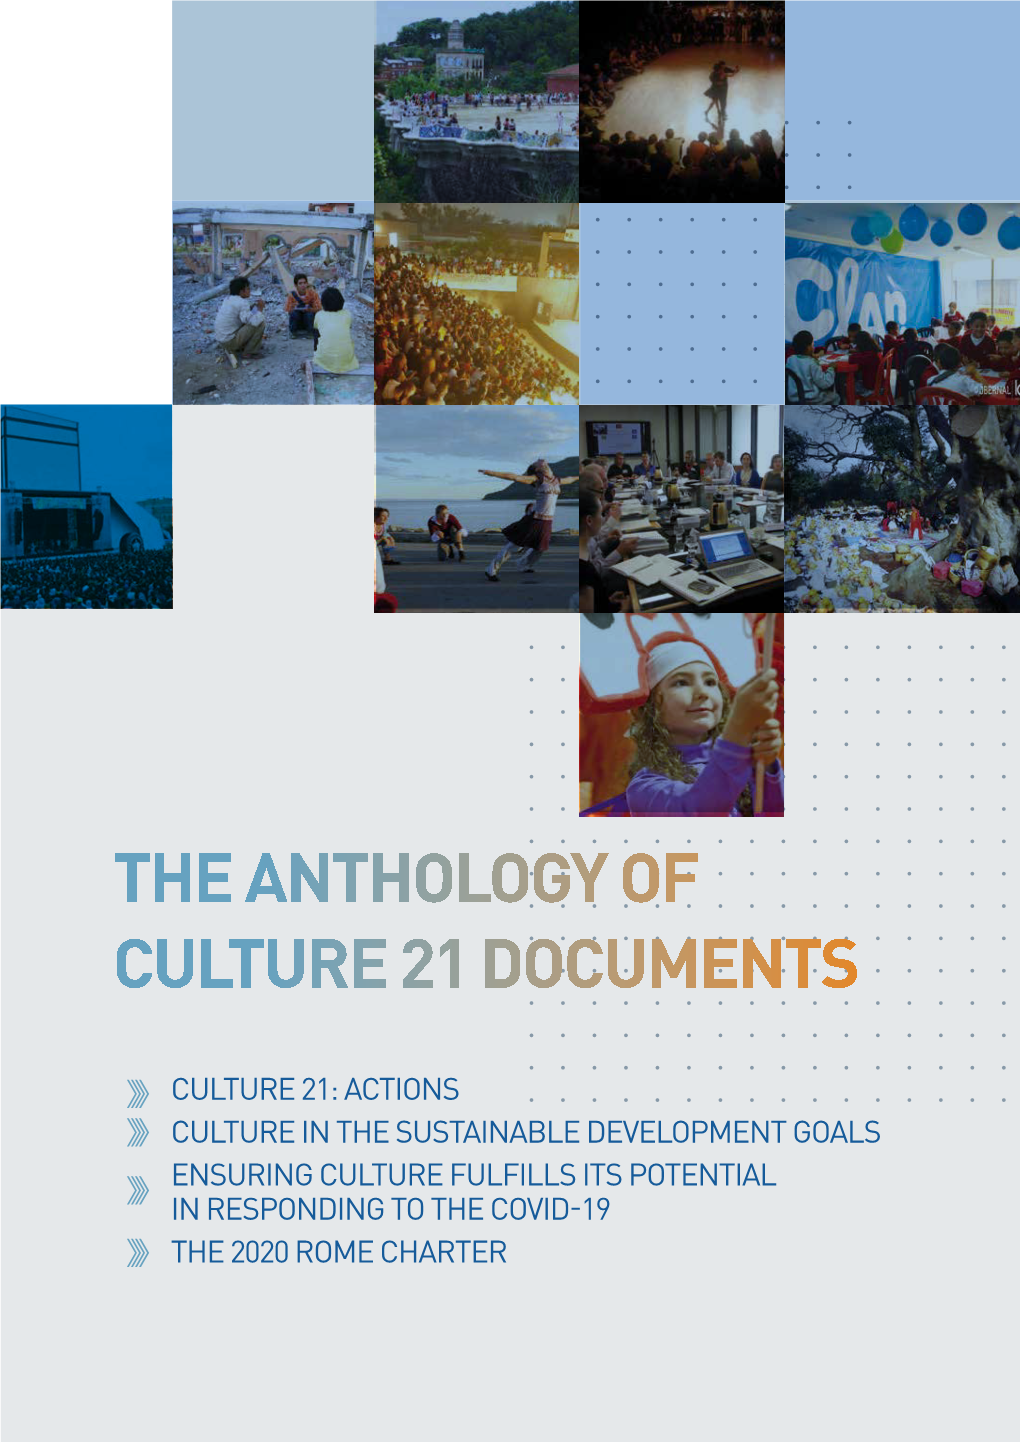 The Anthology of Culture 21 Documents